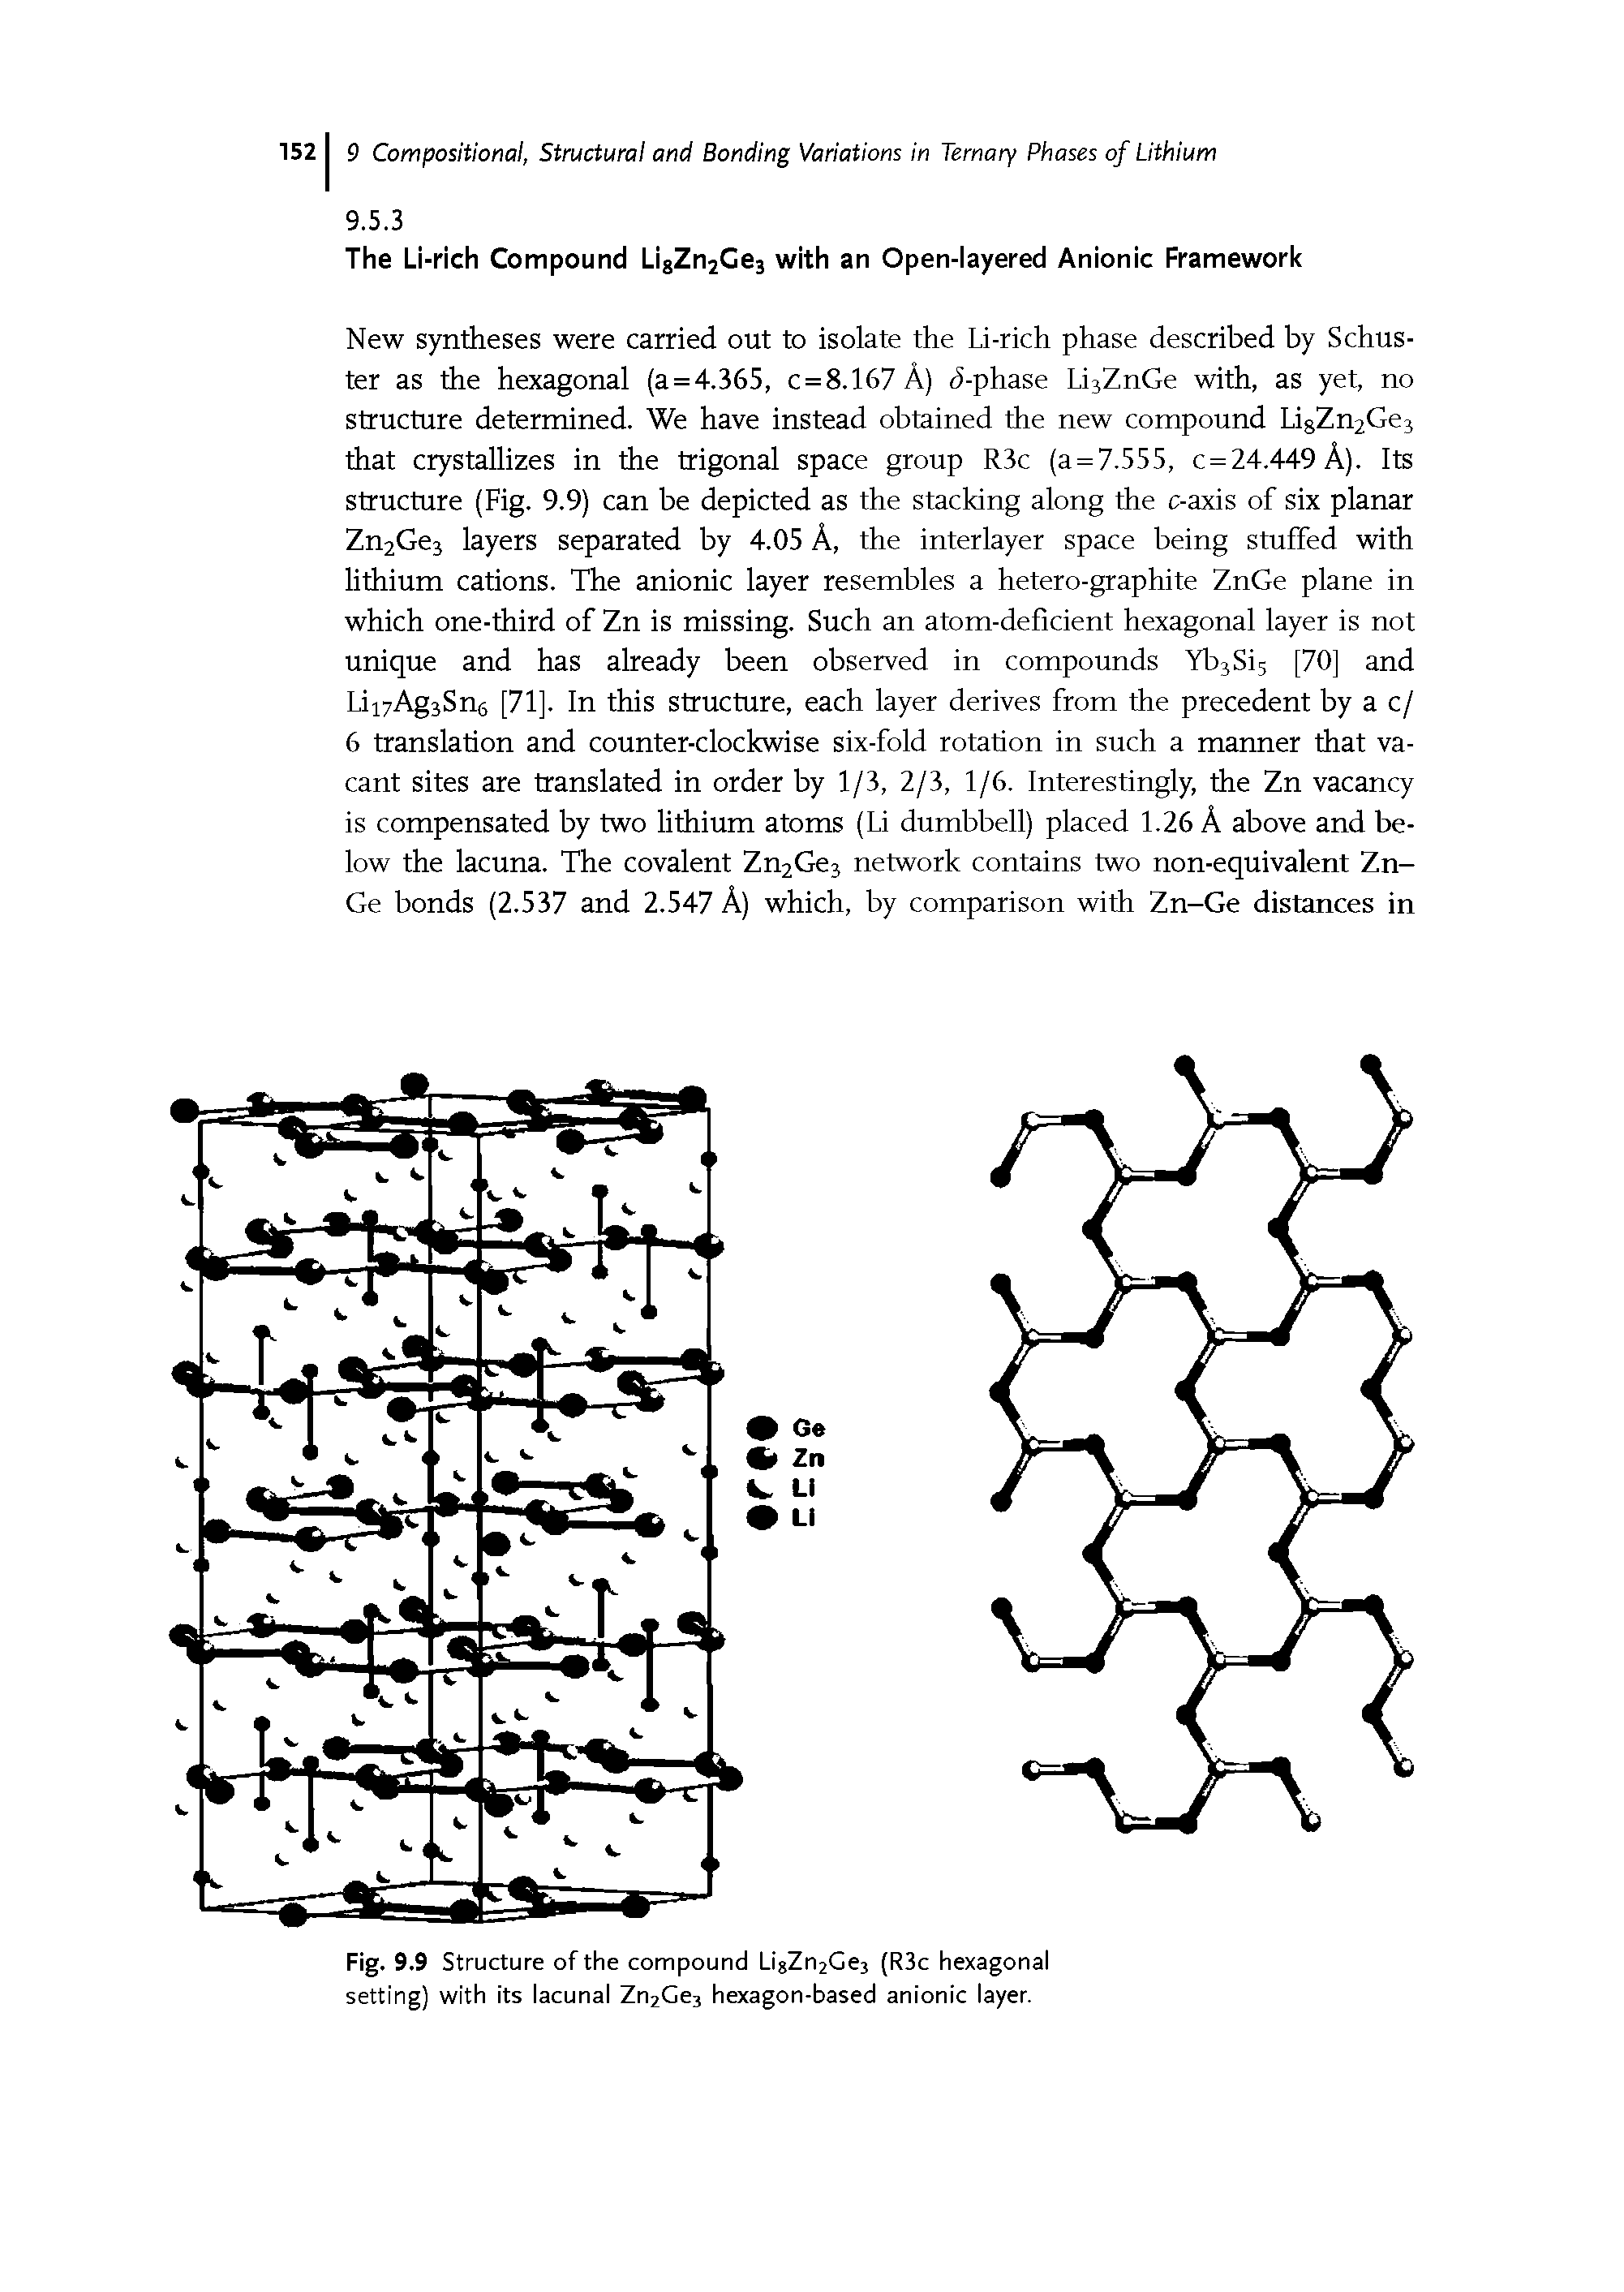 Fig. 9.9 Structure of the compound Li8Zn2Ge3 (R3c hexagonal setting) with its lacunal Zn2Ge3 hexagon-based anionic layer.